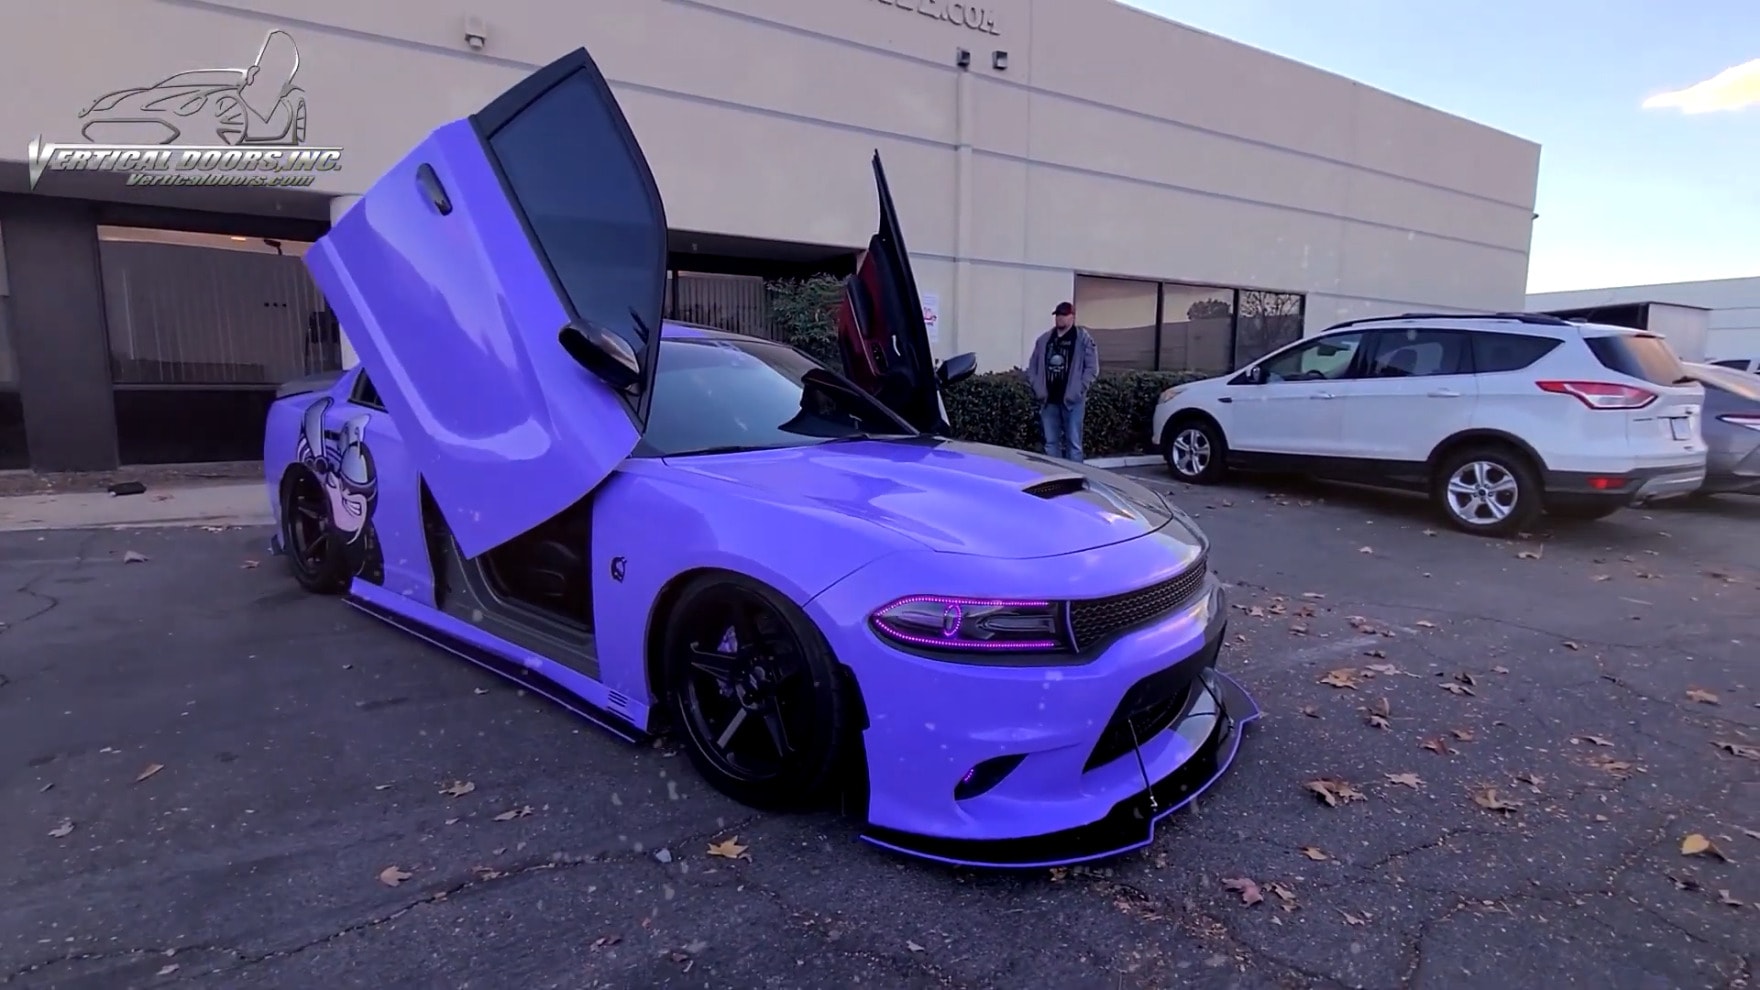 Lambo Doors on a Dodge Charger Are Real, Look a Little Strange -  autoevolution